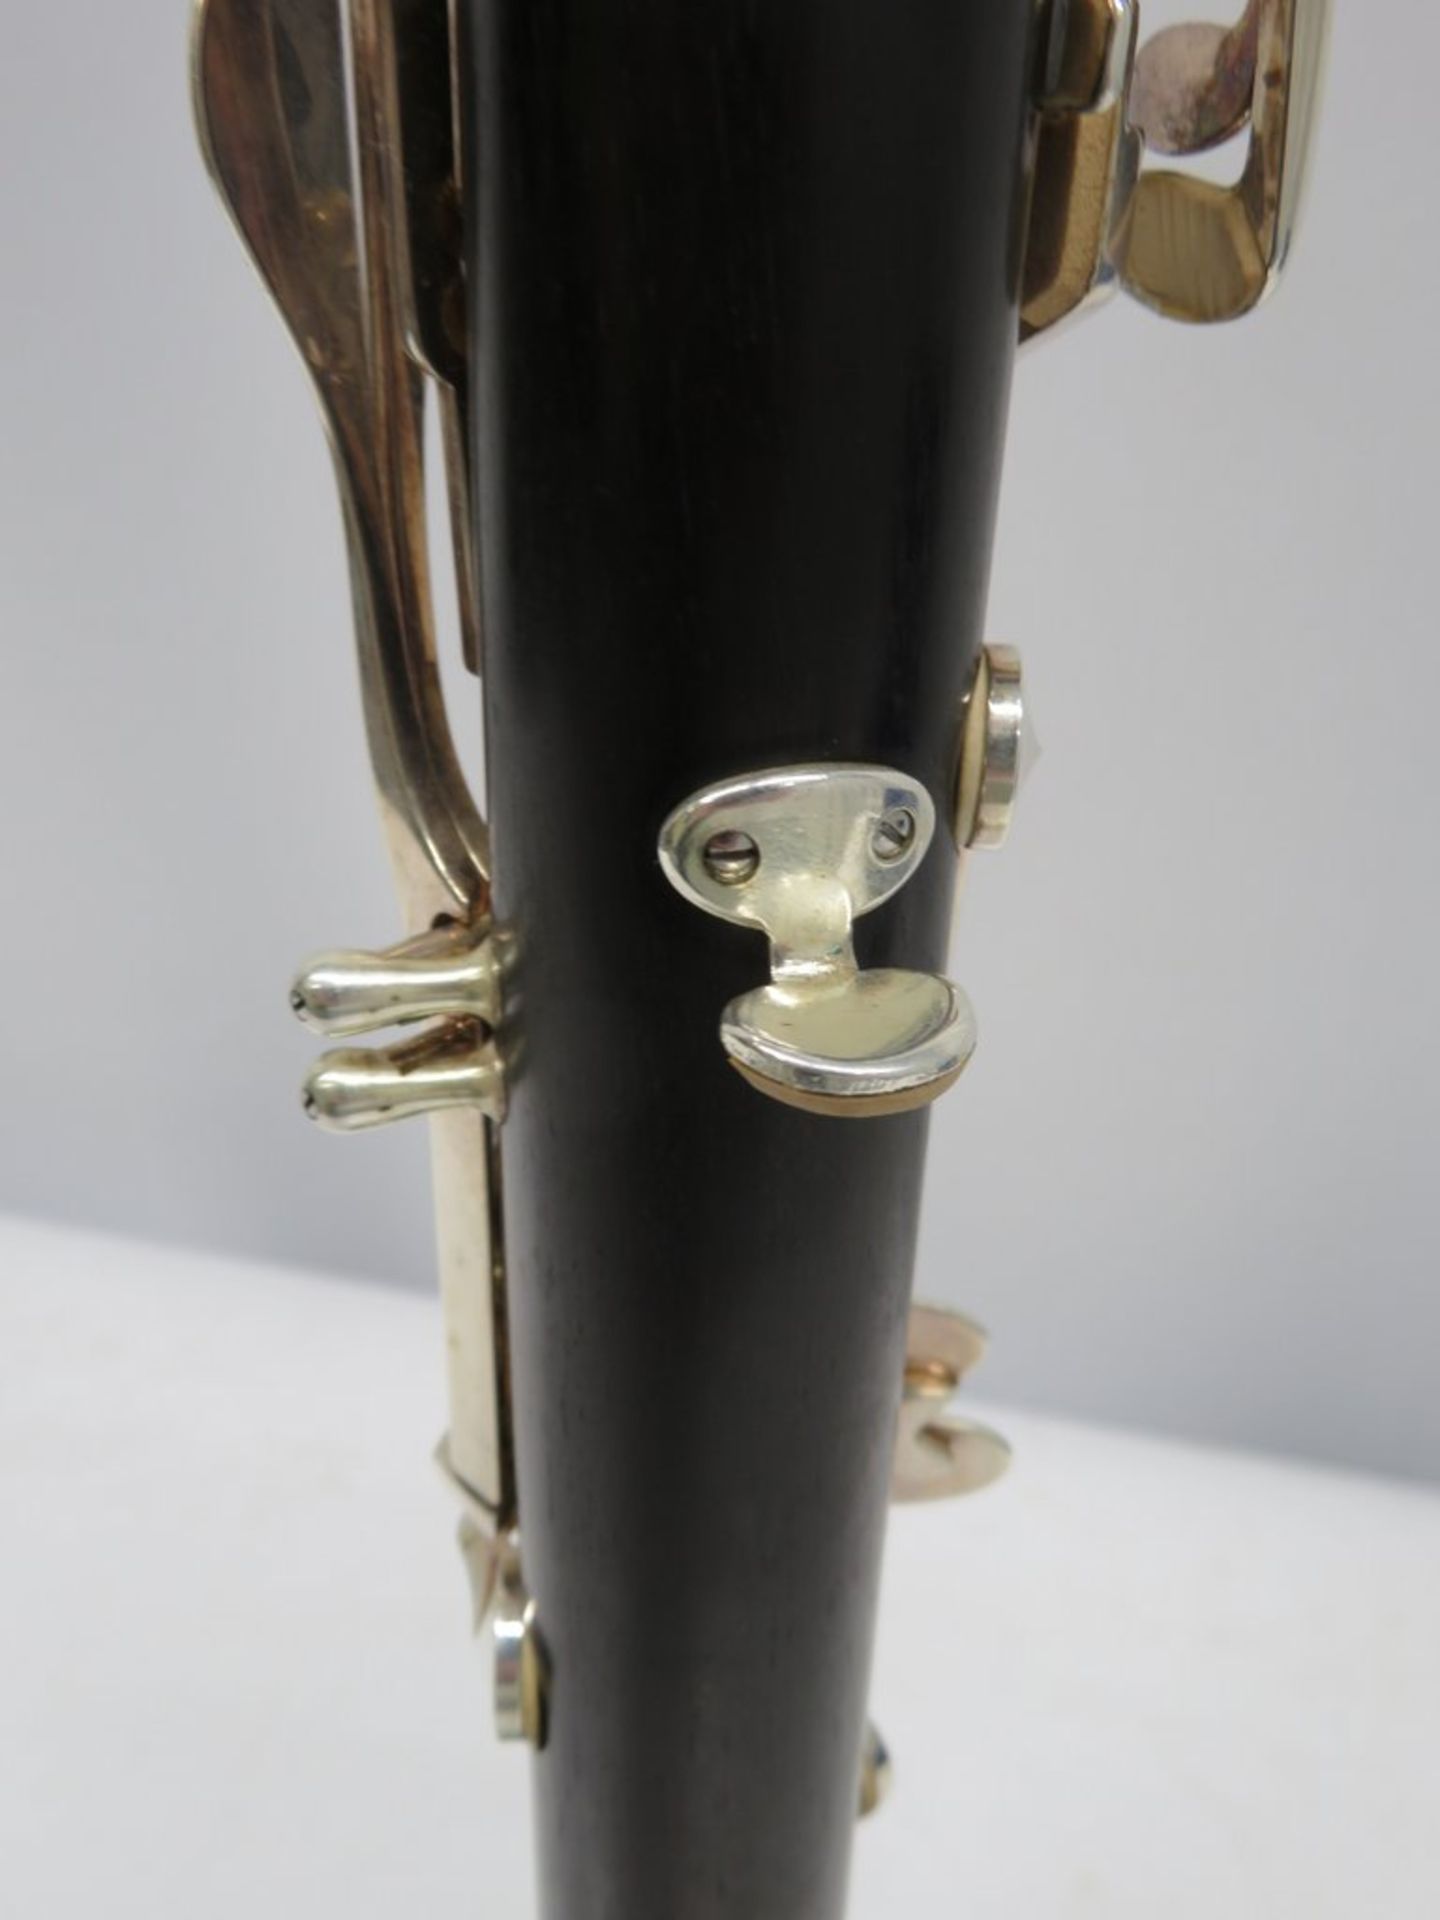 Buffet Crampon R13 Clarinet With Case. Serial Number: 386372. Full Length 63cm. Please No - Image 11 of 14